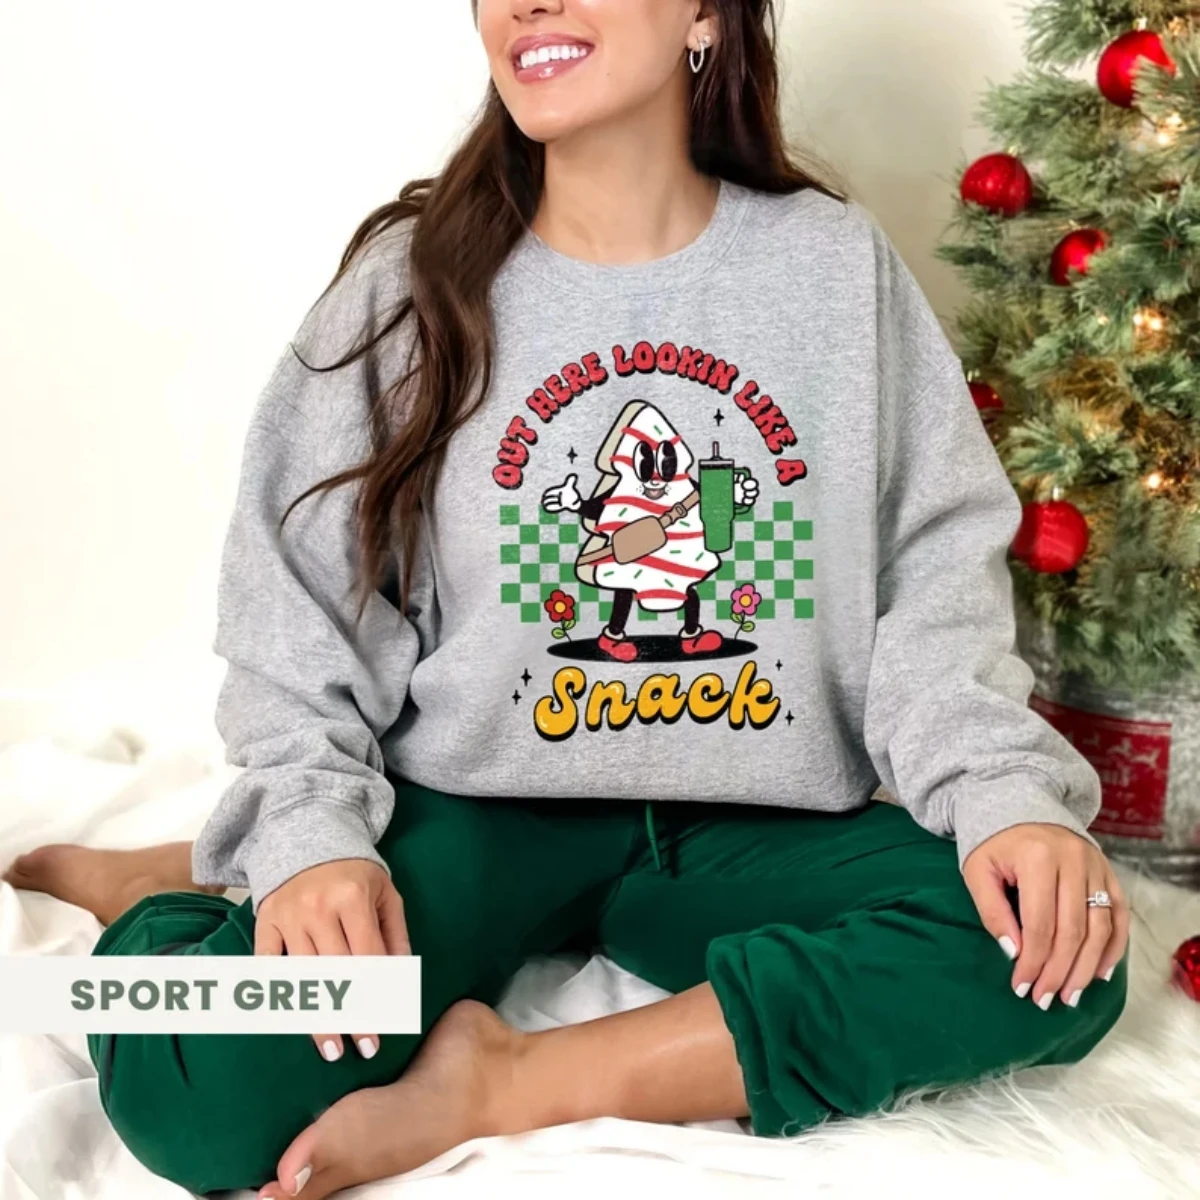 Funny Christmas Sweatshirt Out Here Looking Like A Snack Cake Pullover Shirt Little Debbie Christmas Tree Cake Winter Clothes custom products are purchased from here